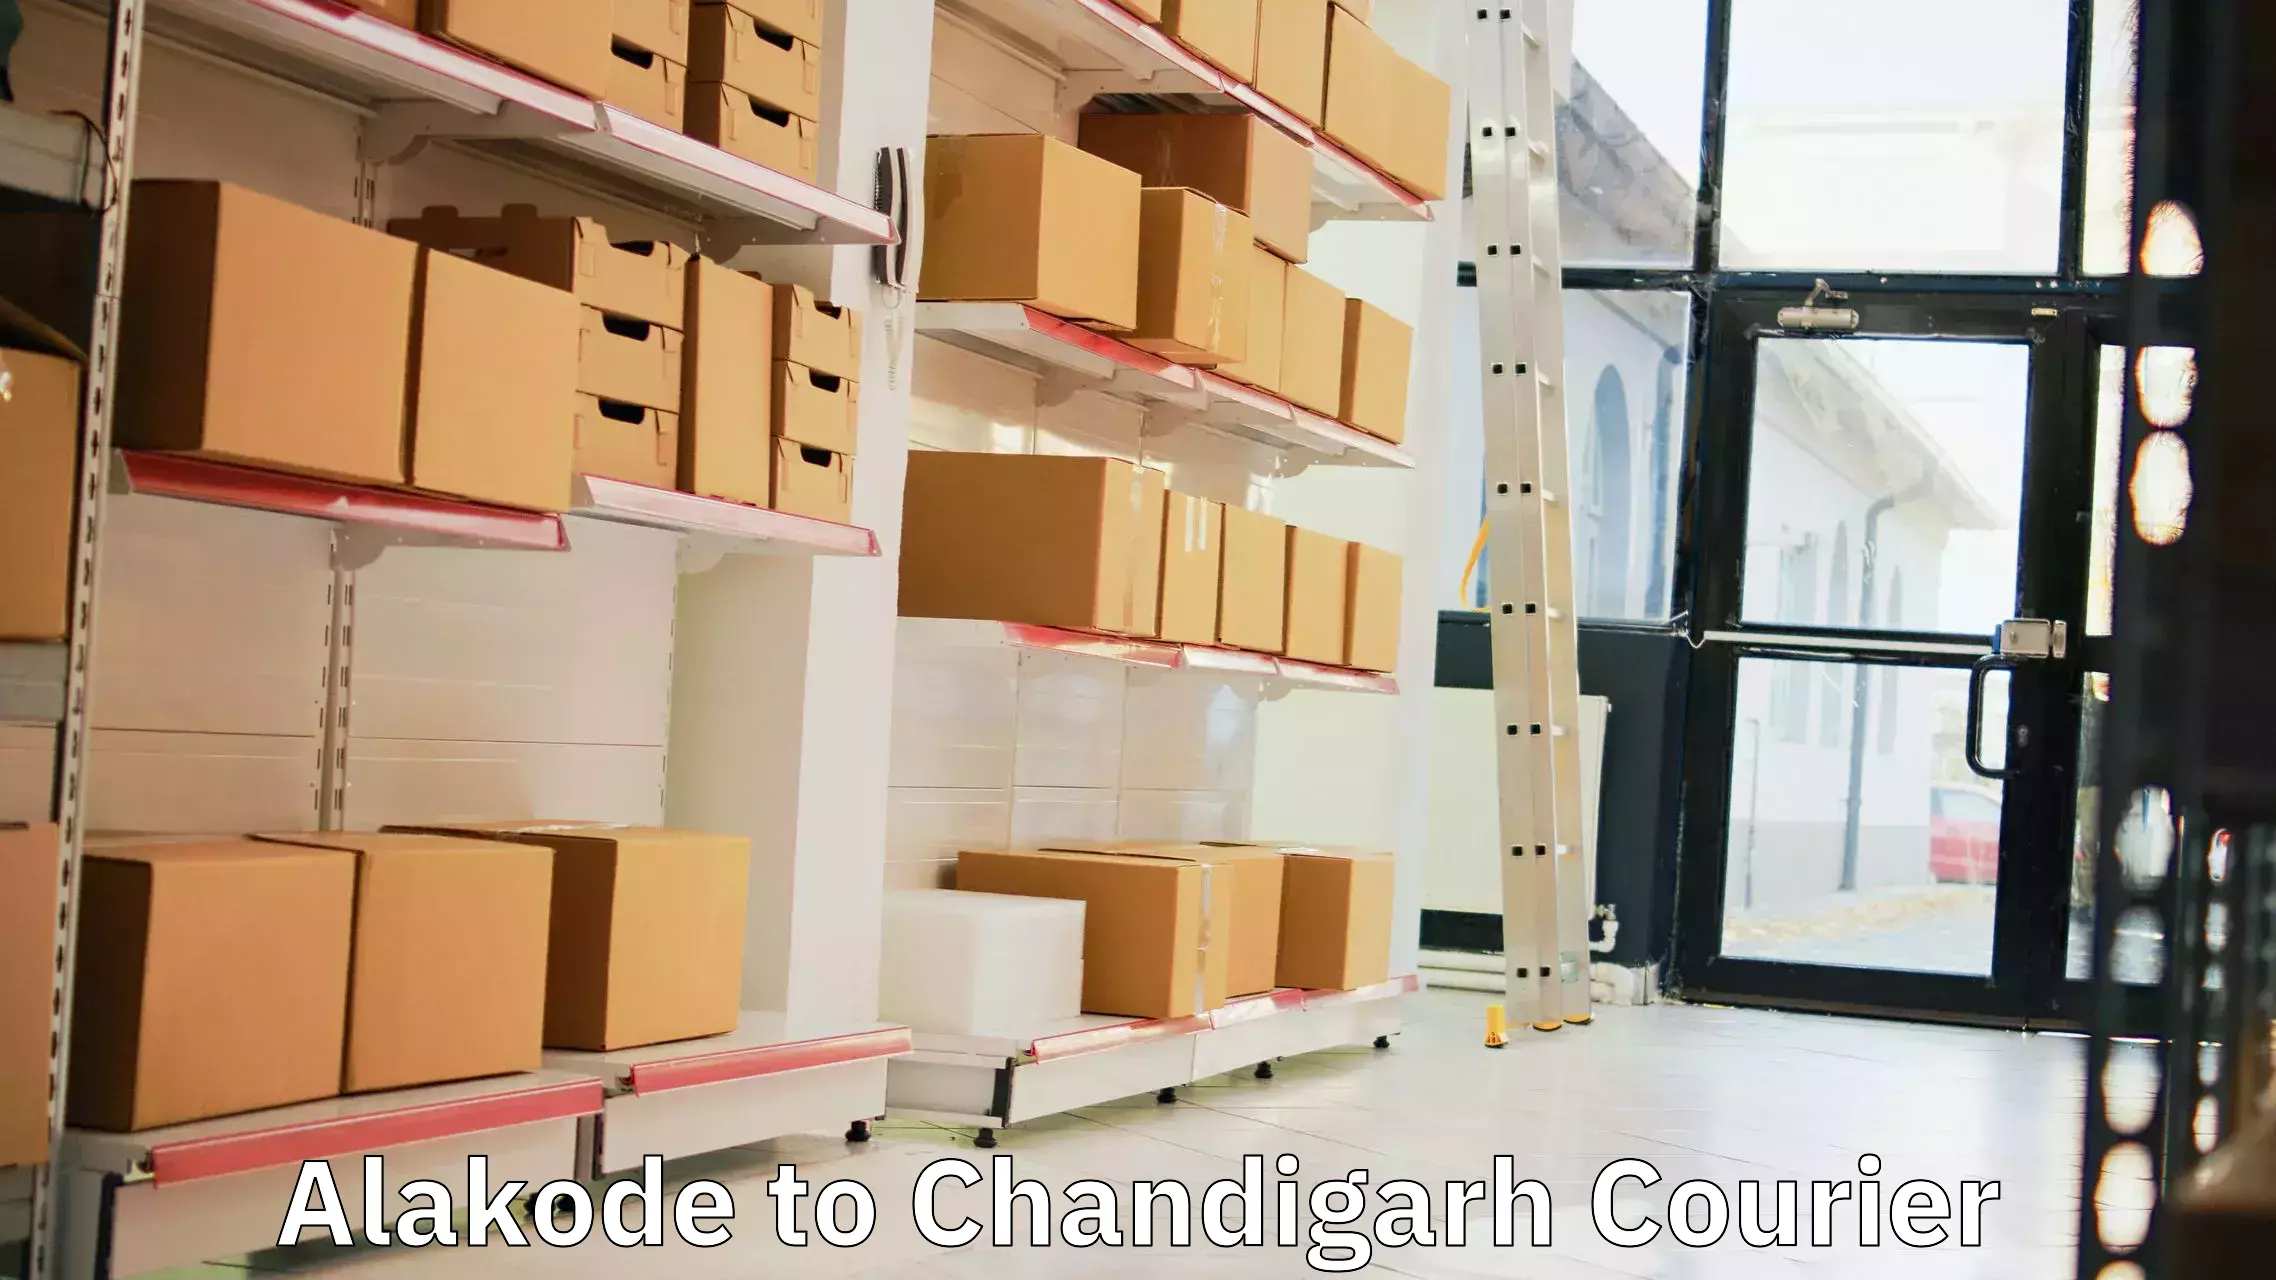 Courier service booking Alakode to Chandigarh